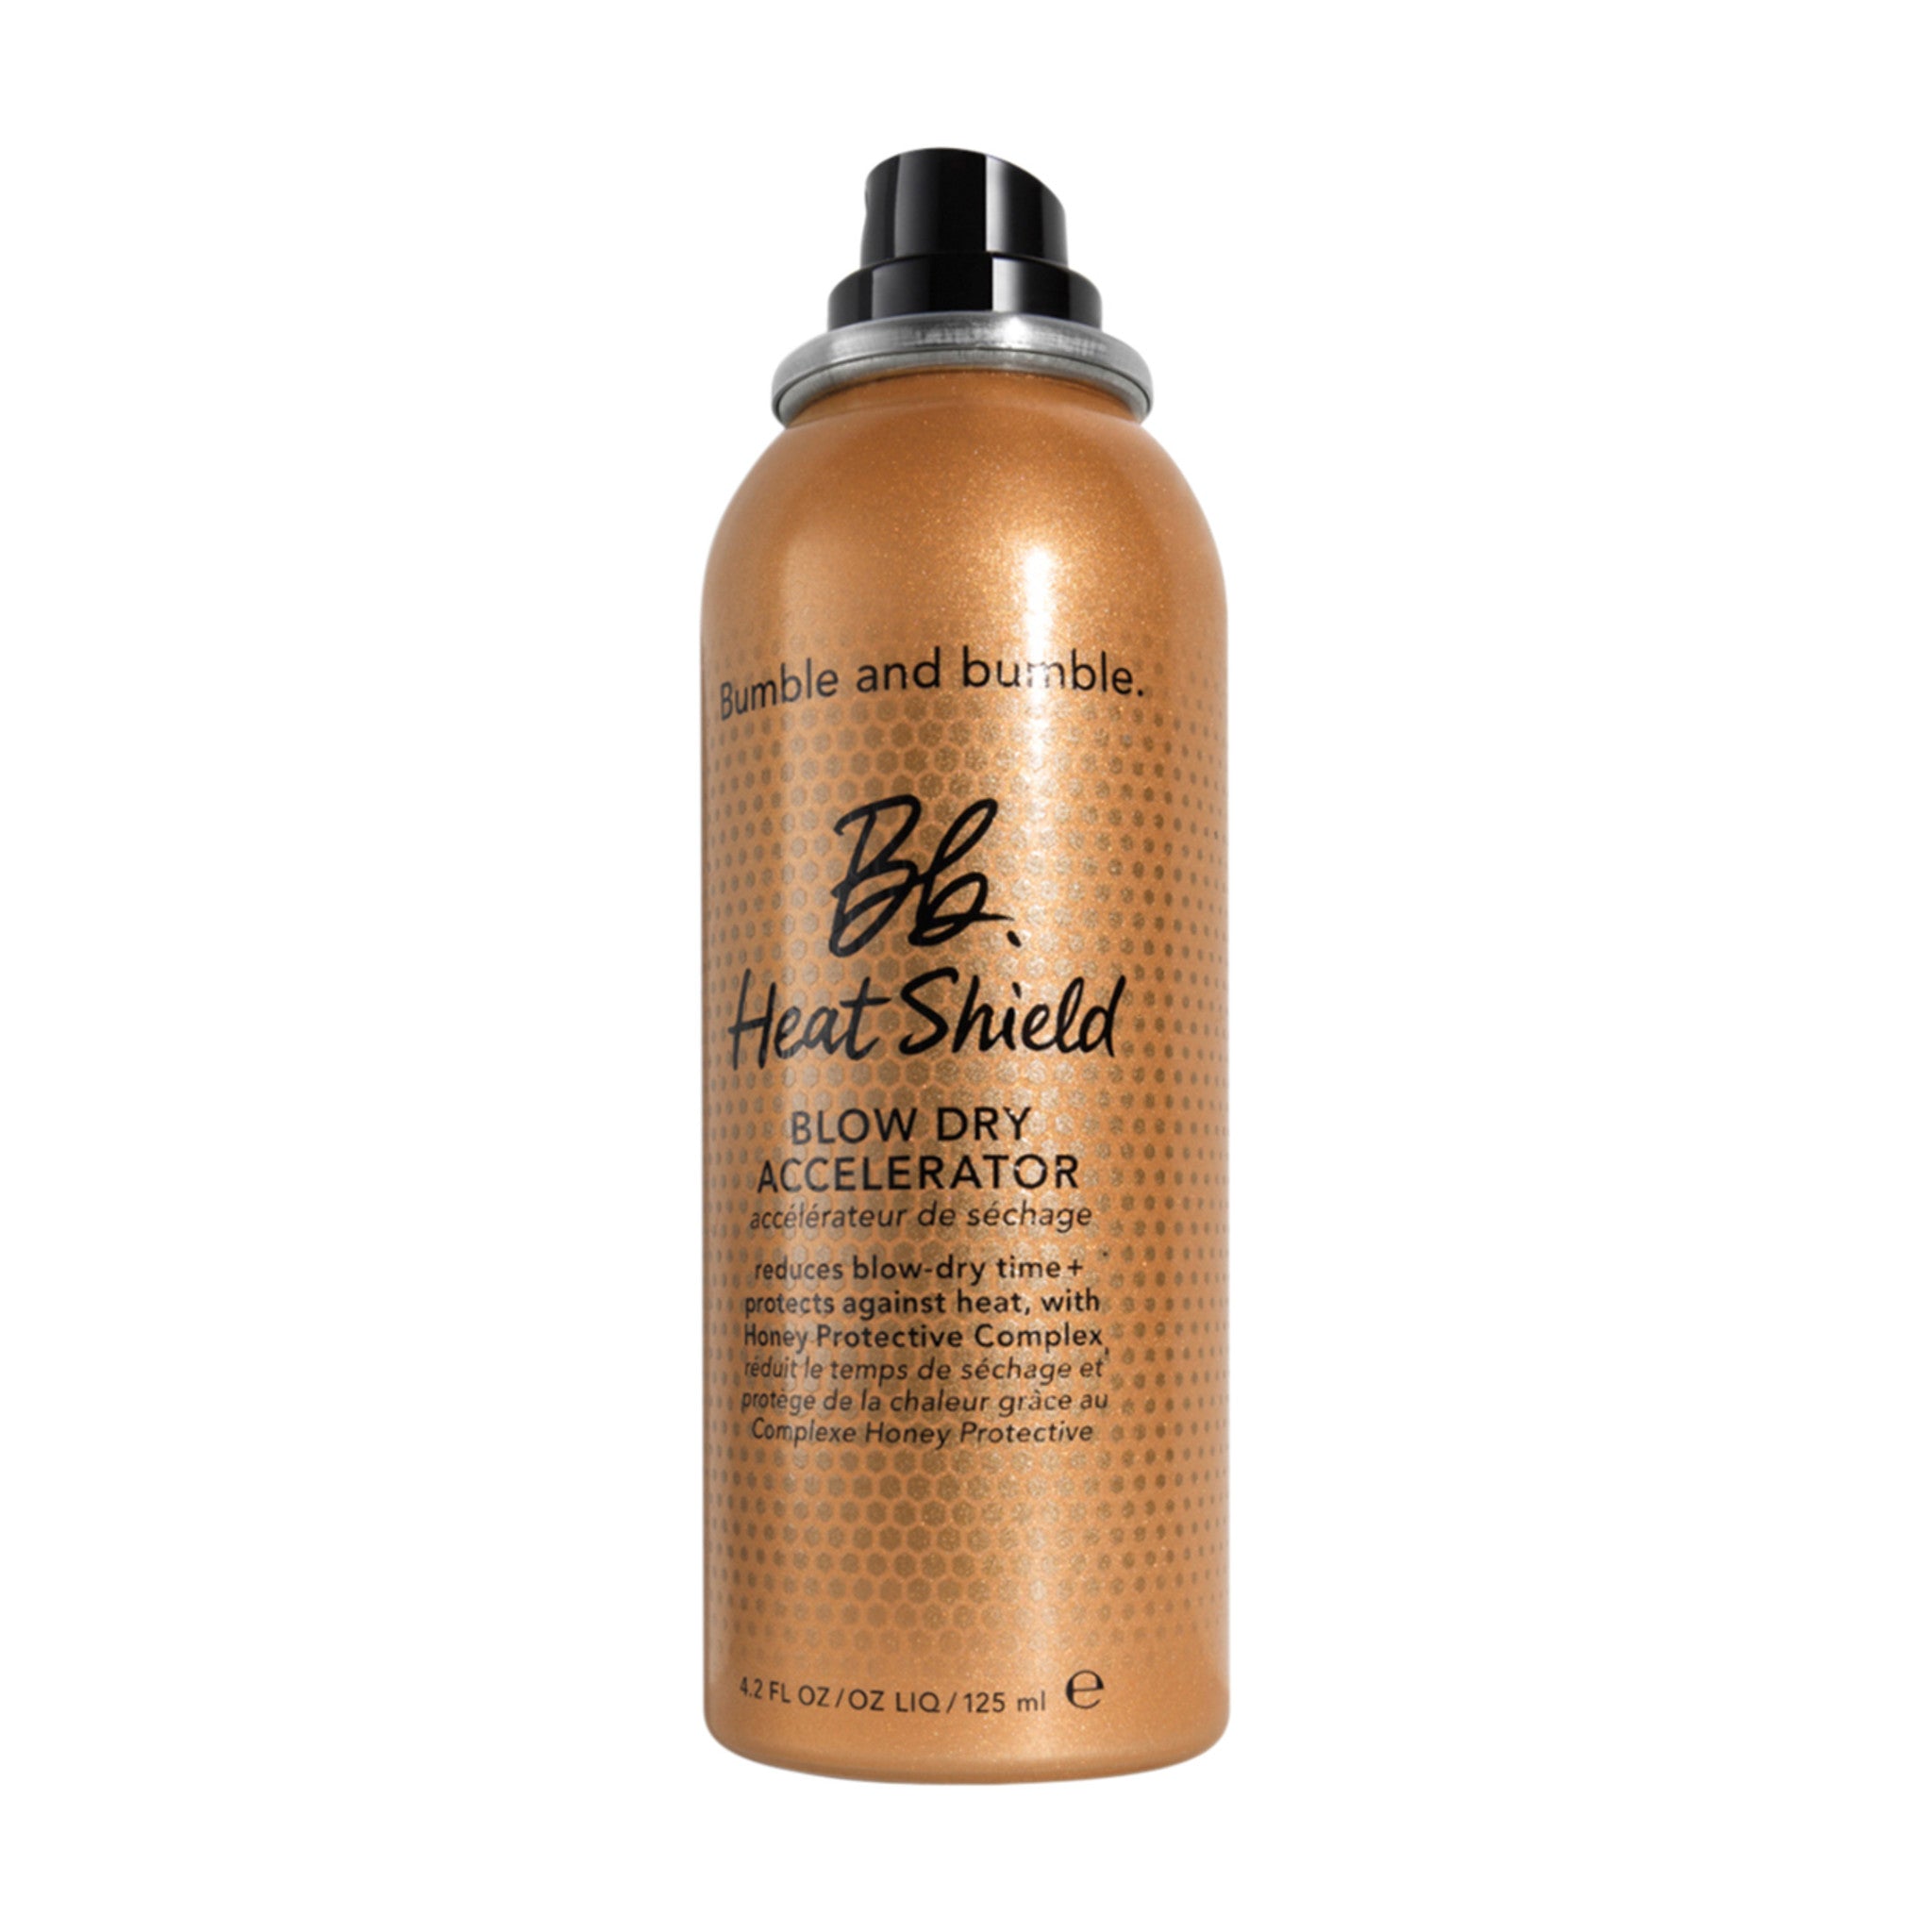 Bumble and Bumble Heat Shield Blow Dry Accelerator main image.